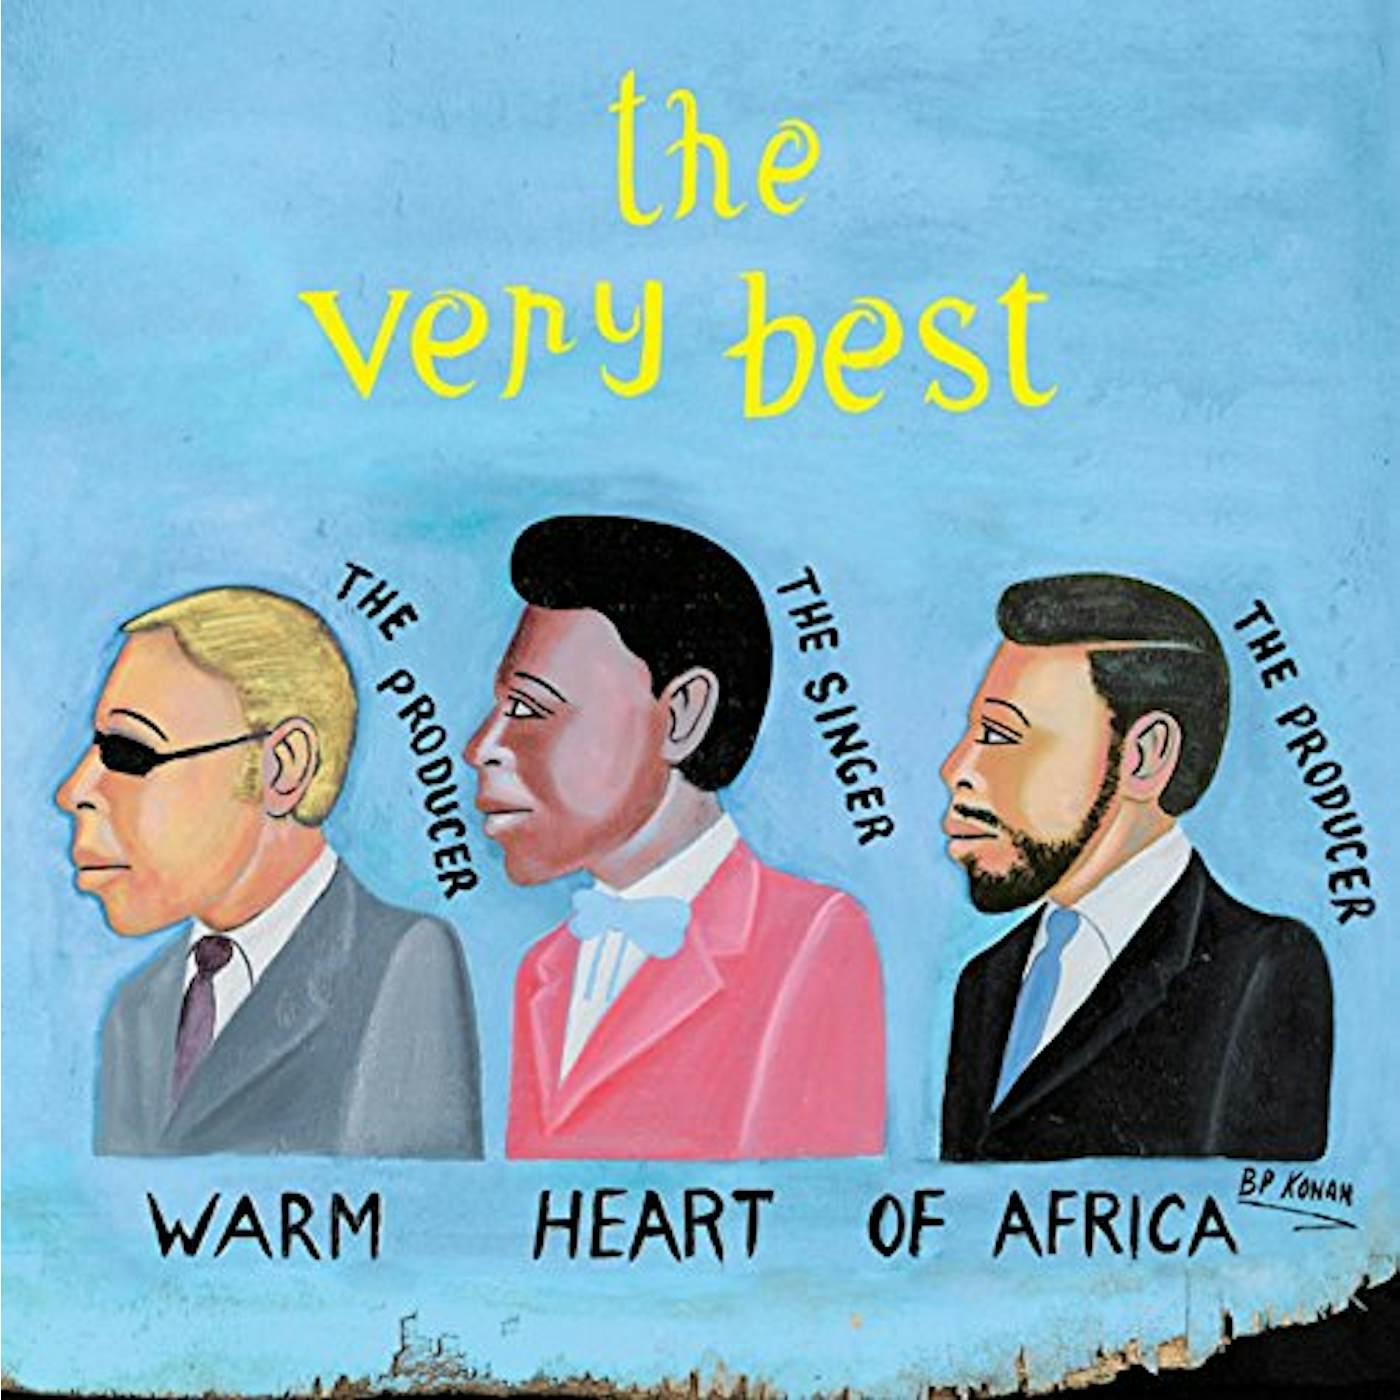 The Very Best WARM HEART OF AFRICA CD